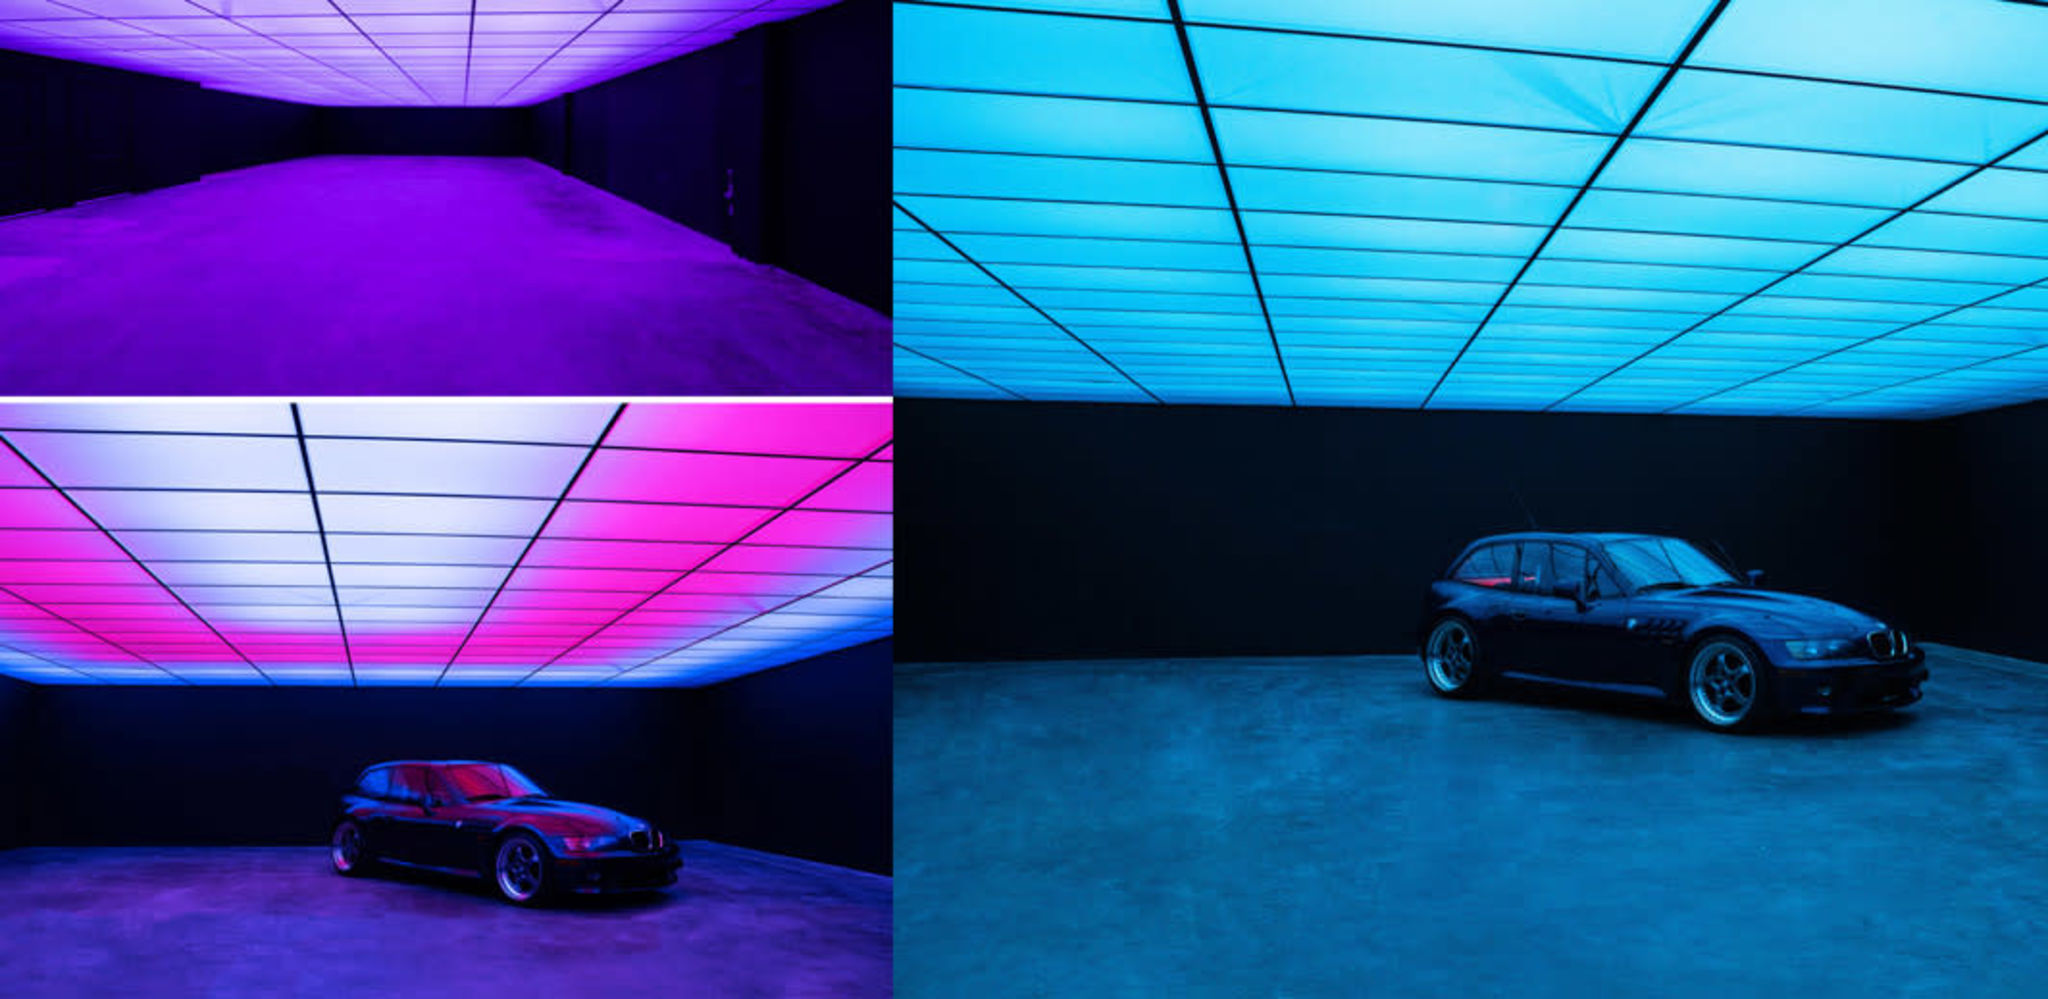 Blackout Photo & video studio for cars with fully controllable LED RGB  Ceiling and Black walls - Yukon 5, Hawthorne, CA, Production